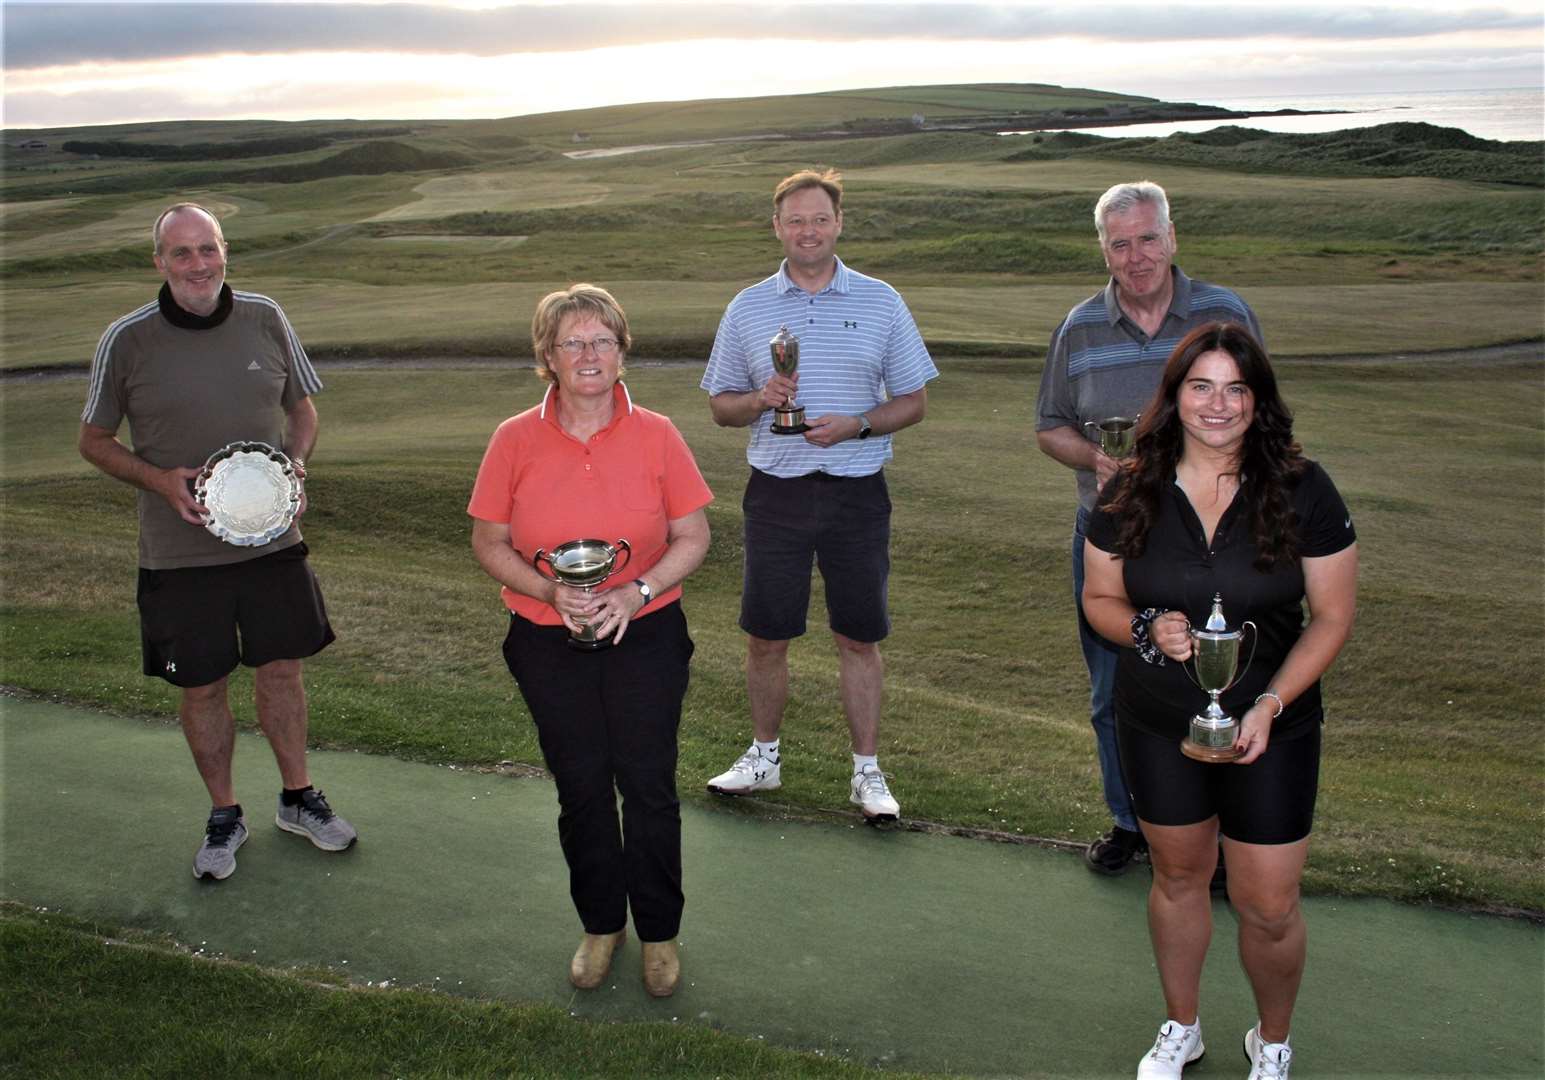 Prize-winners from all the club championship competitions at Reay – (from left) Andy Mowat, gents' handicap winner; Tricia Macdonald, ladies' handicap winner; Colin Paterson, gents' scratch winner; Alex Anderson, gents' senior winner; and Eleanor Tunn, ladies' scratch winner. Picture: Fred Groves